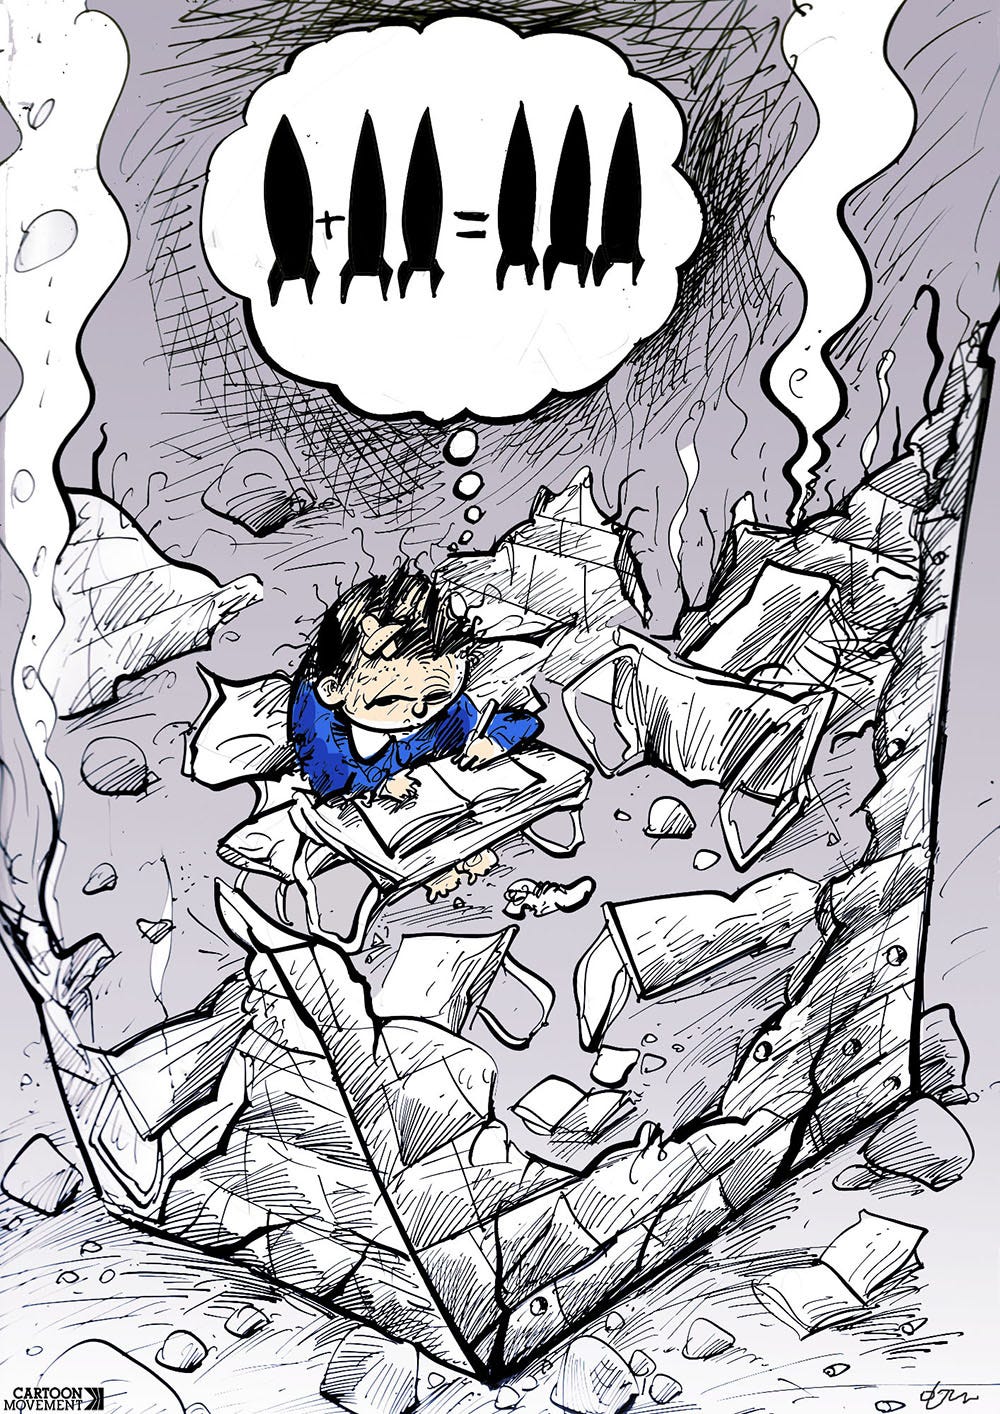 Cartoon showing a child sitting in the ruins of a bombed school reading a math book and doing an equation in his head. The thought bubble shows he is adding two bombs to one bomb, making a total of three bombs.